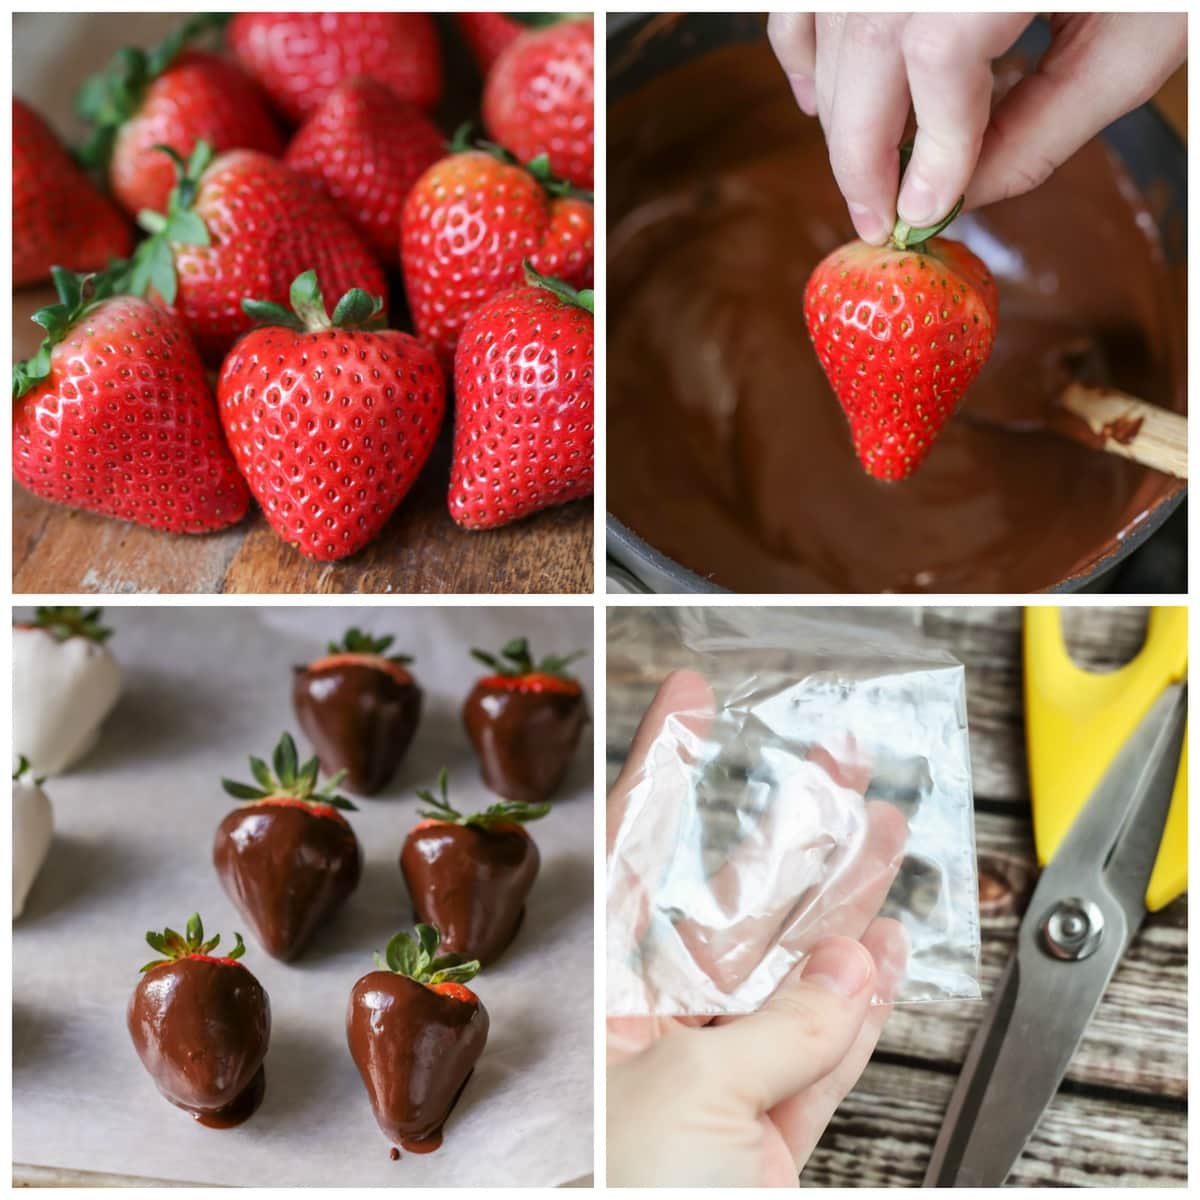 collage showing how to make Chocolate Covered Strawberries including plain strawberries, then dipped in melted chocolate cooling